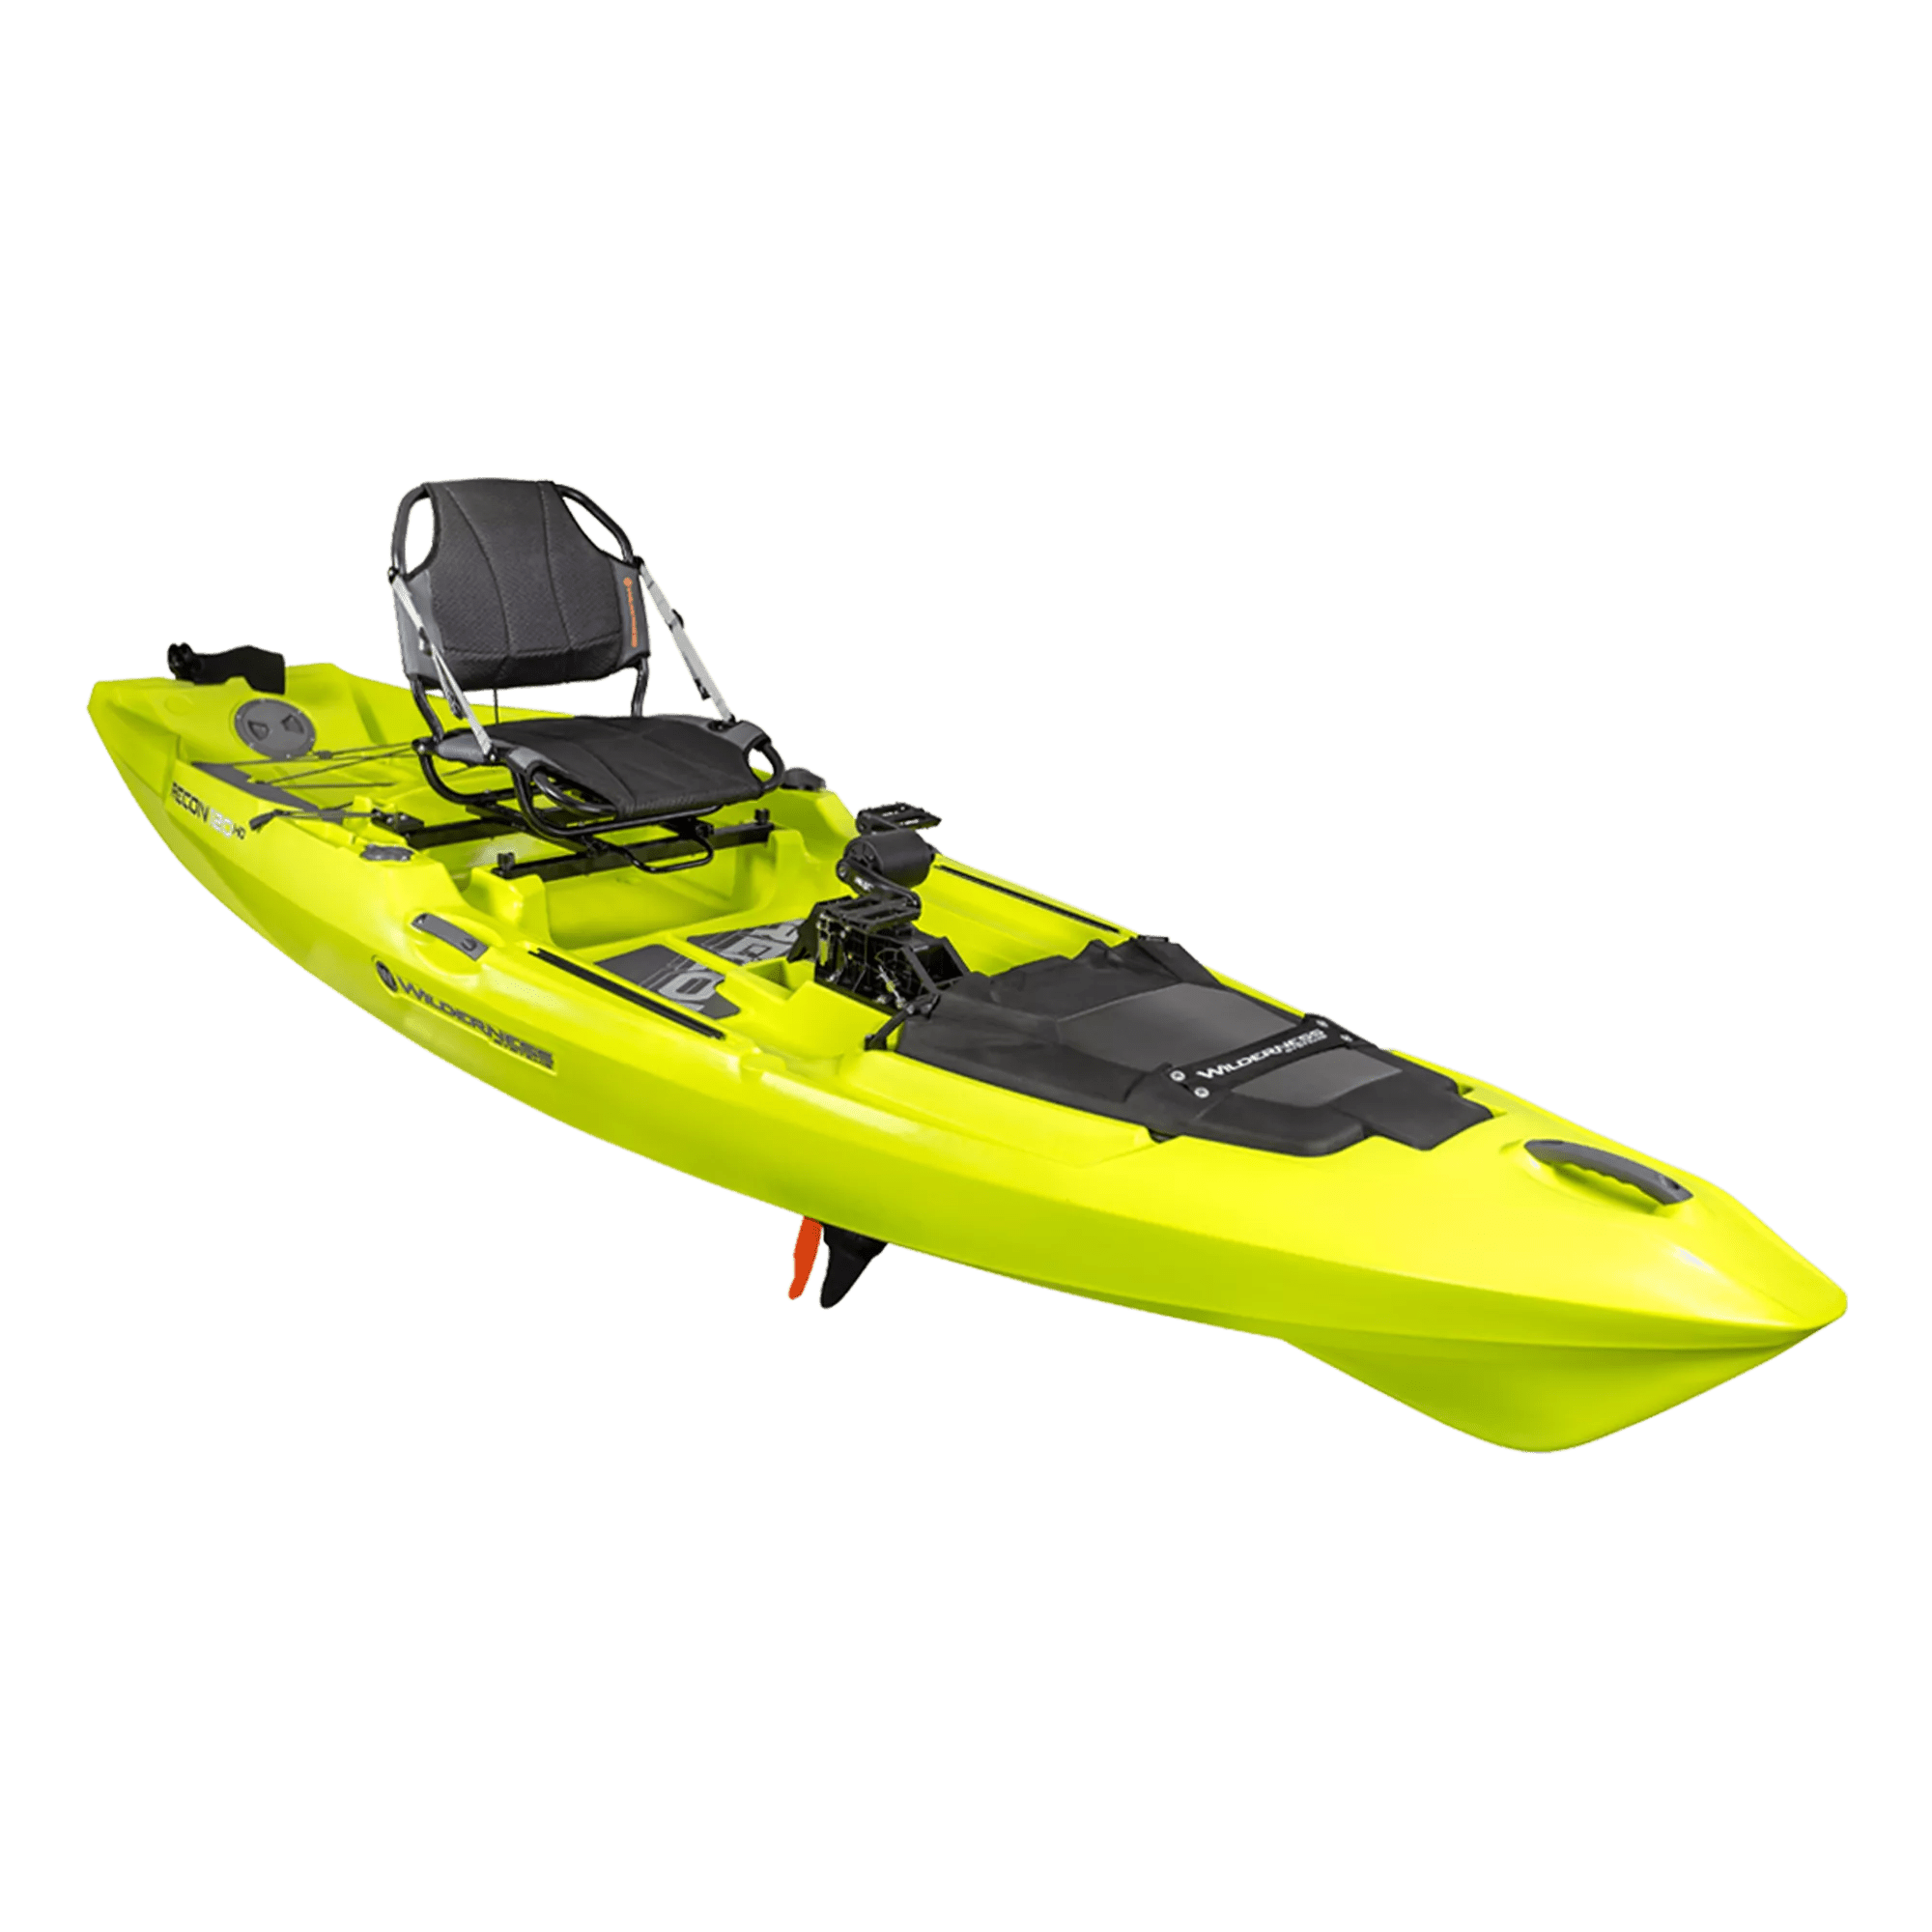 WILDERNESS SYSTEMS - Recon 120 HD Fishing Kayak - Discontinued color/model - Yellow - 9751090180 - ISO 